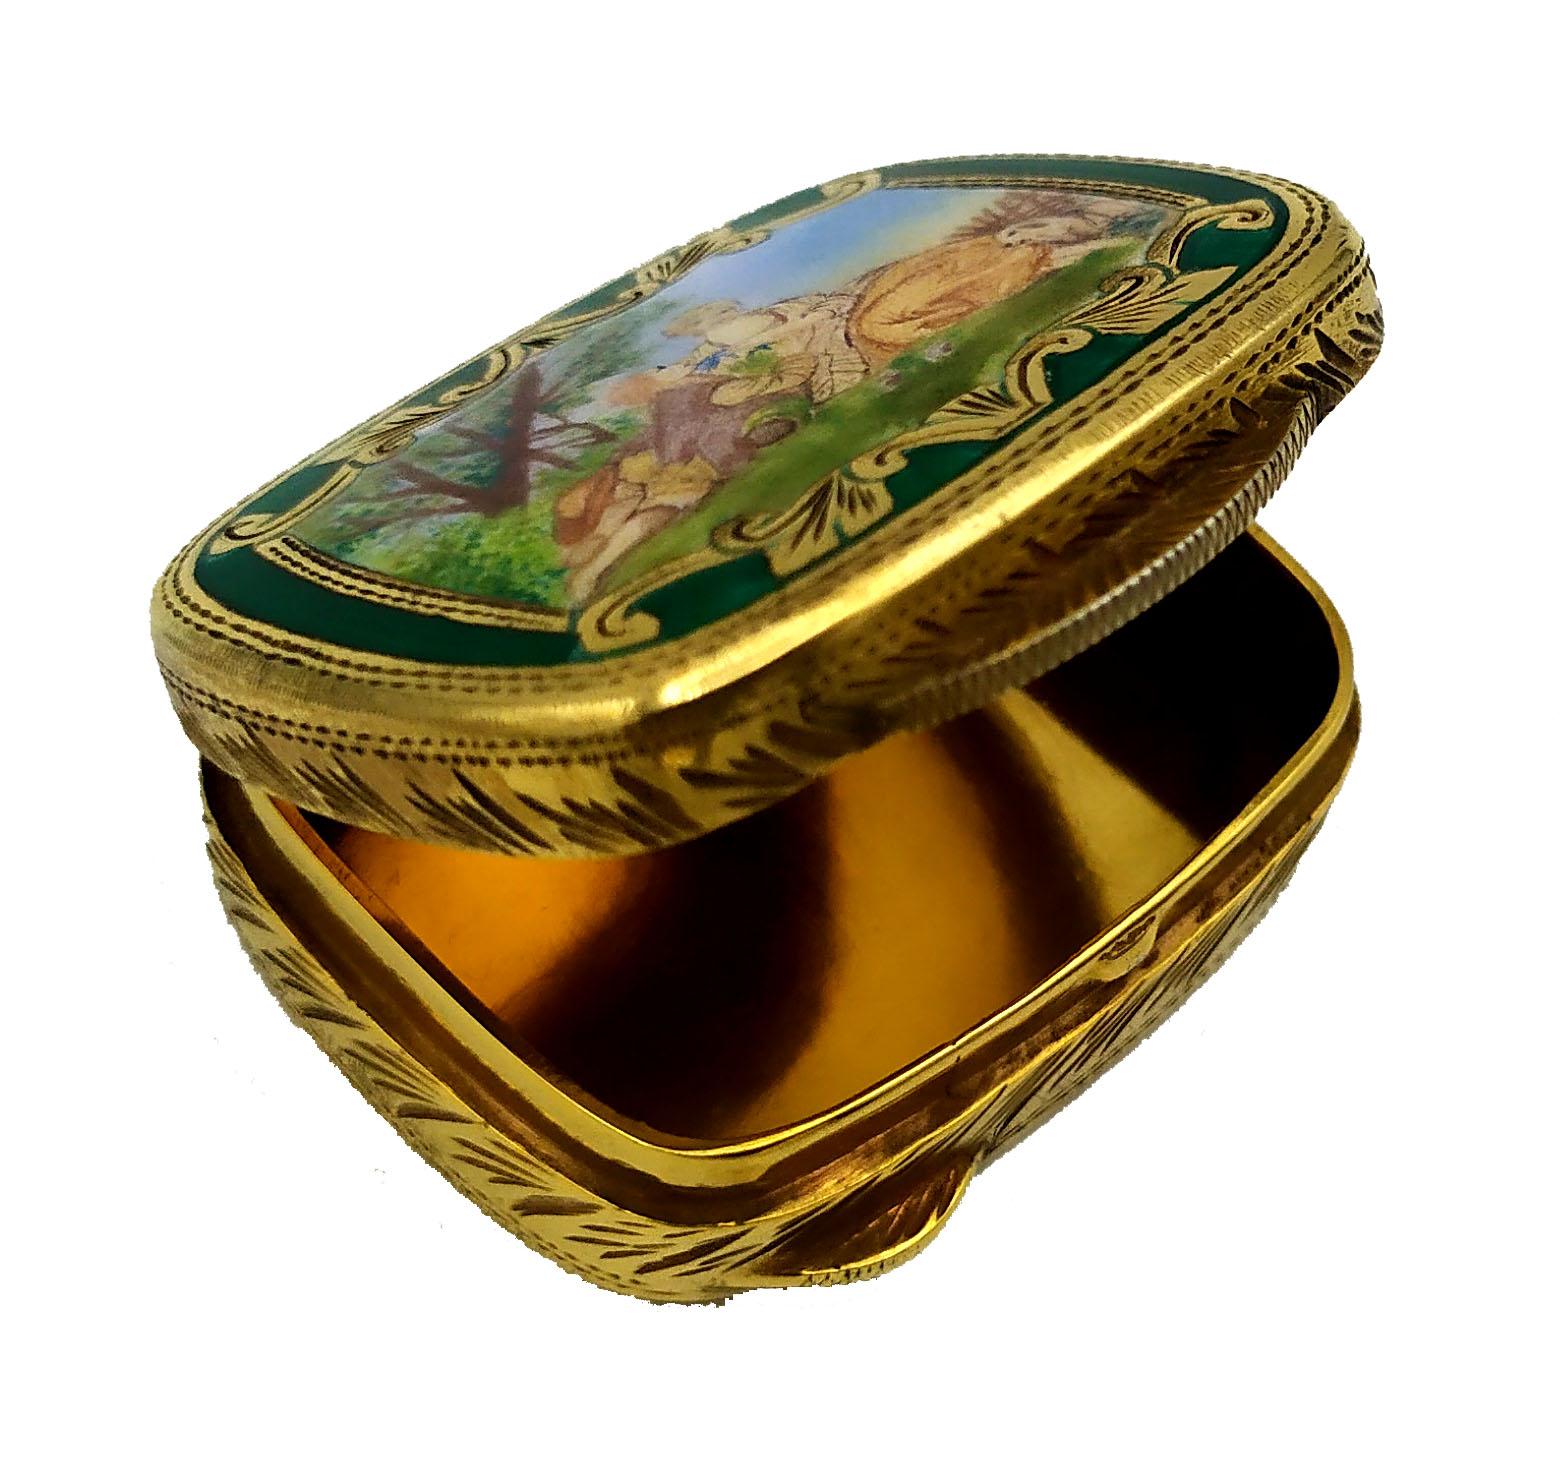 Pill Box Hand Painted Miniature Enamel Louis XVI Style Sterling Silver Salimbeni In Excellent Condition For Sale In Firenze, FI